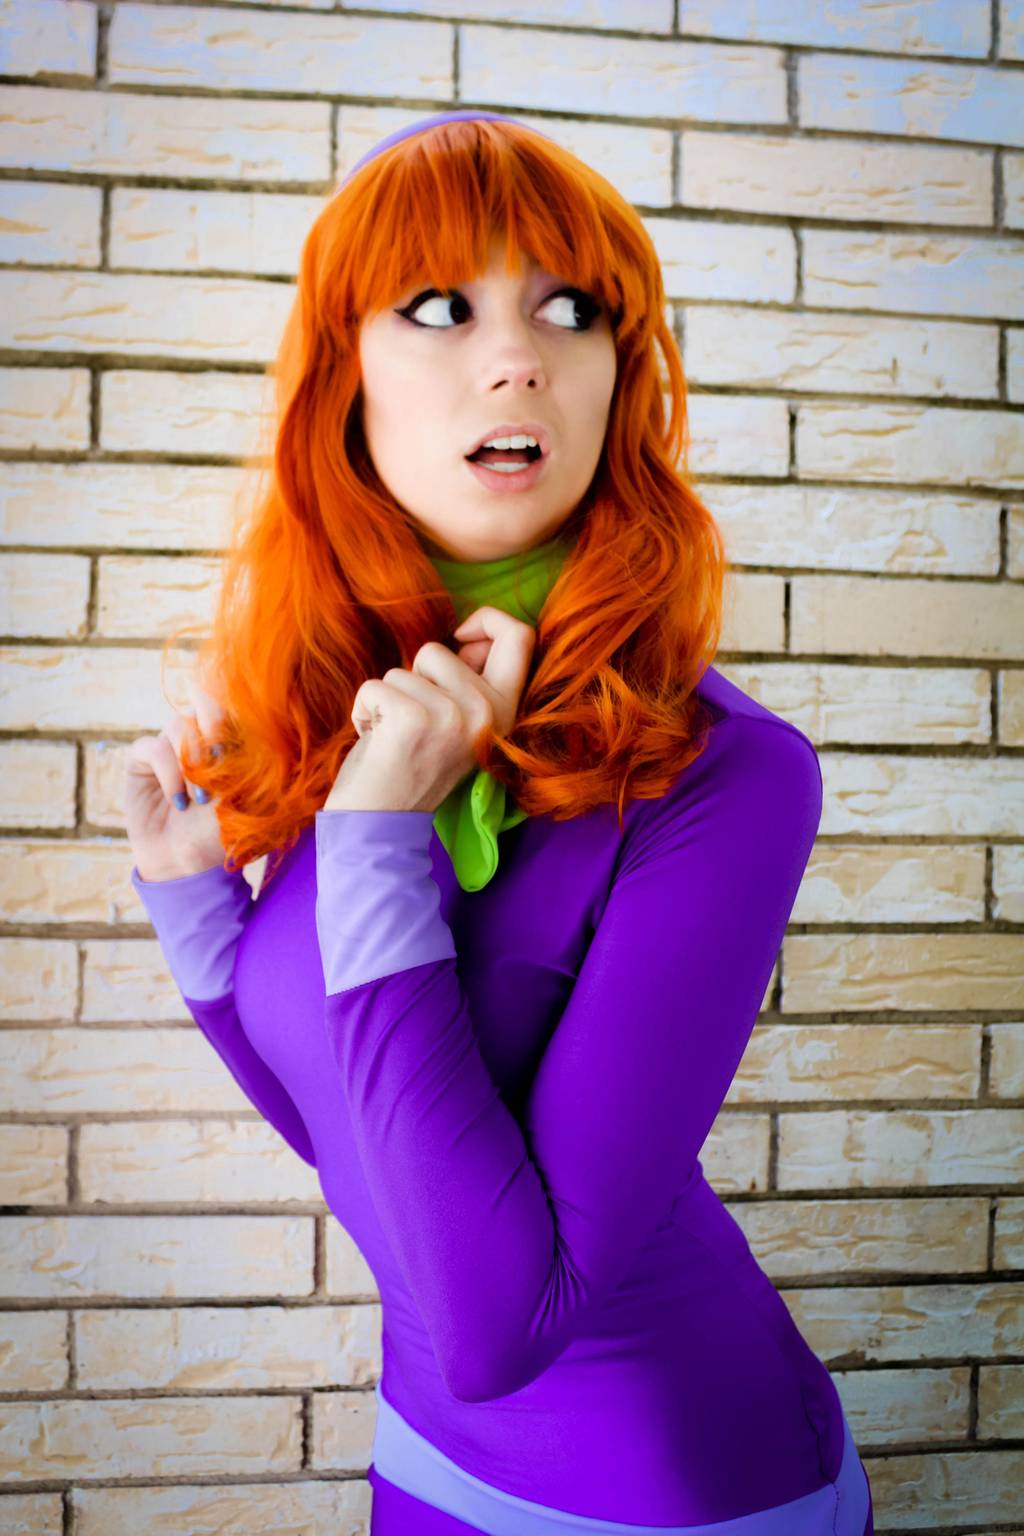 70+ Hot Pictures Of Daphne Blake From Scooby Doo Which Are Sure to Catch Your Attention 80